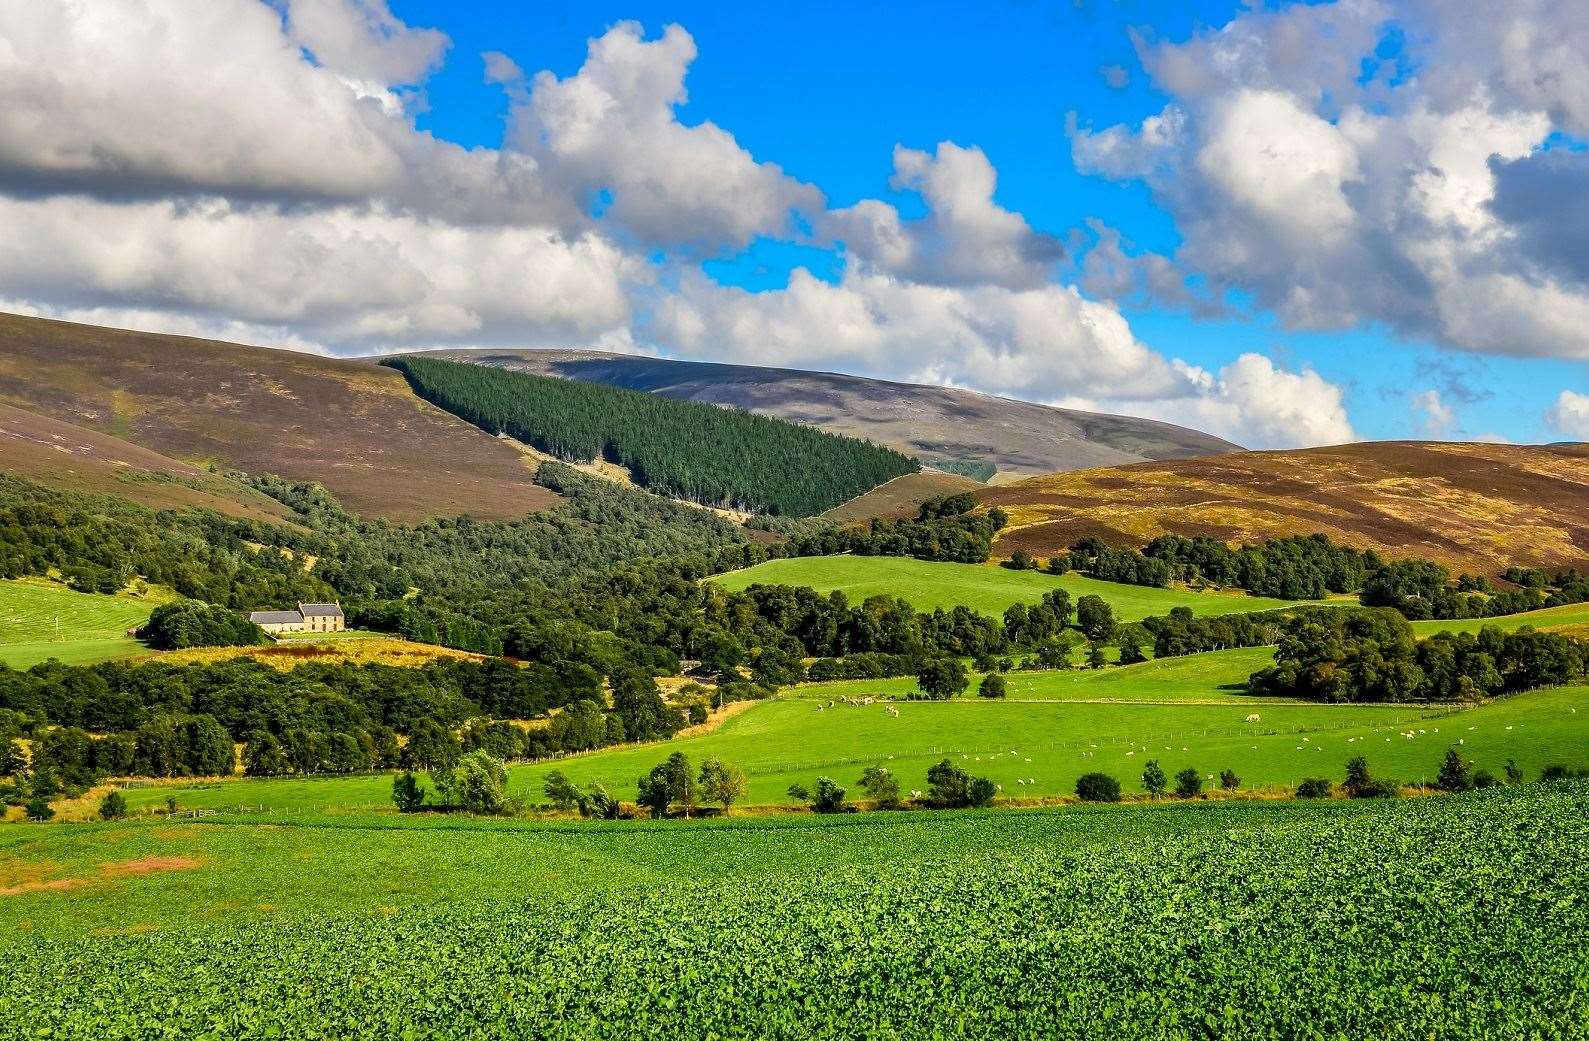 New legislation could change how Scotland's land is owned and managed in the future.